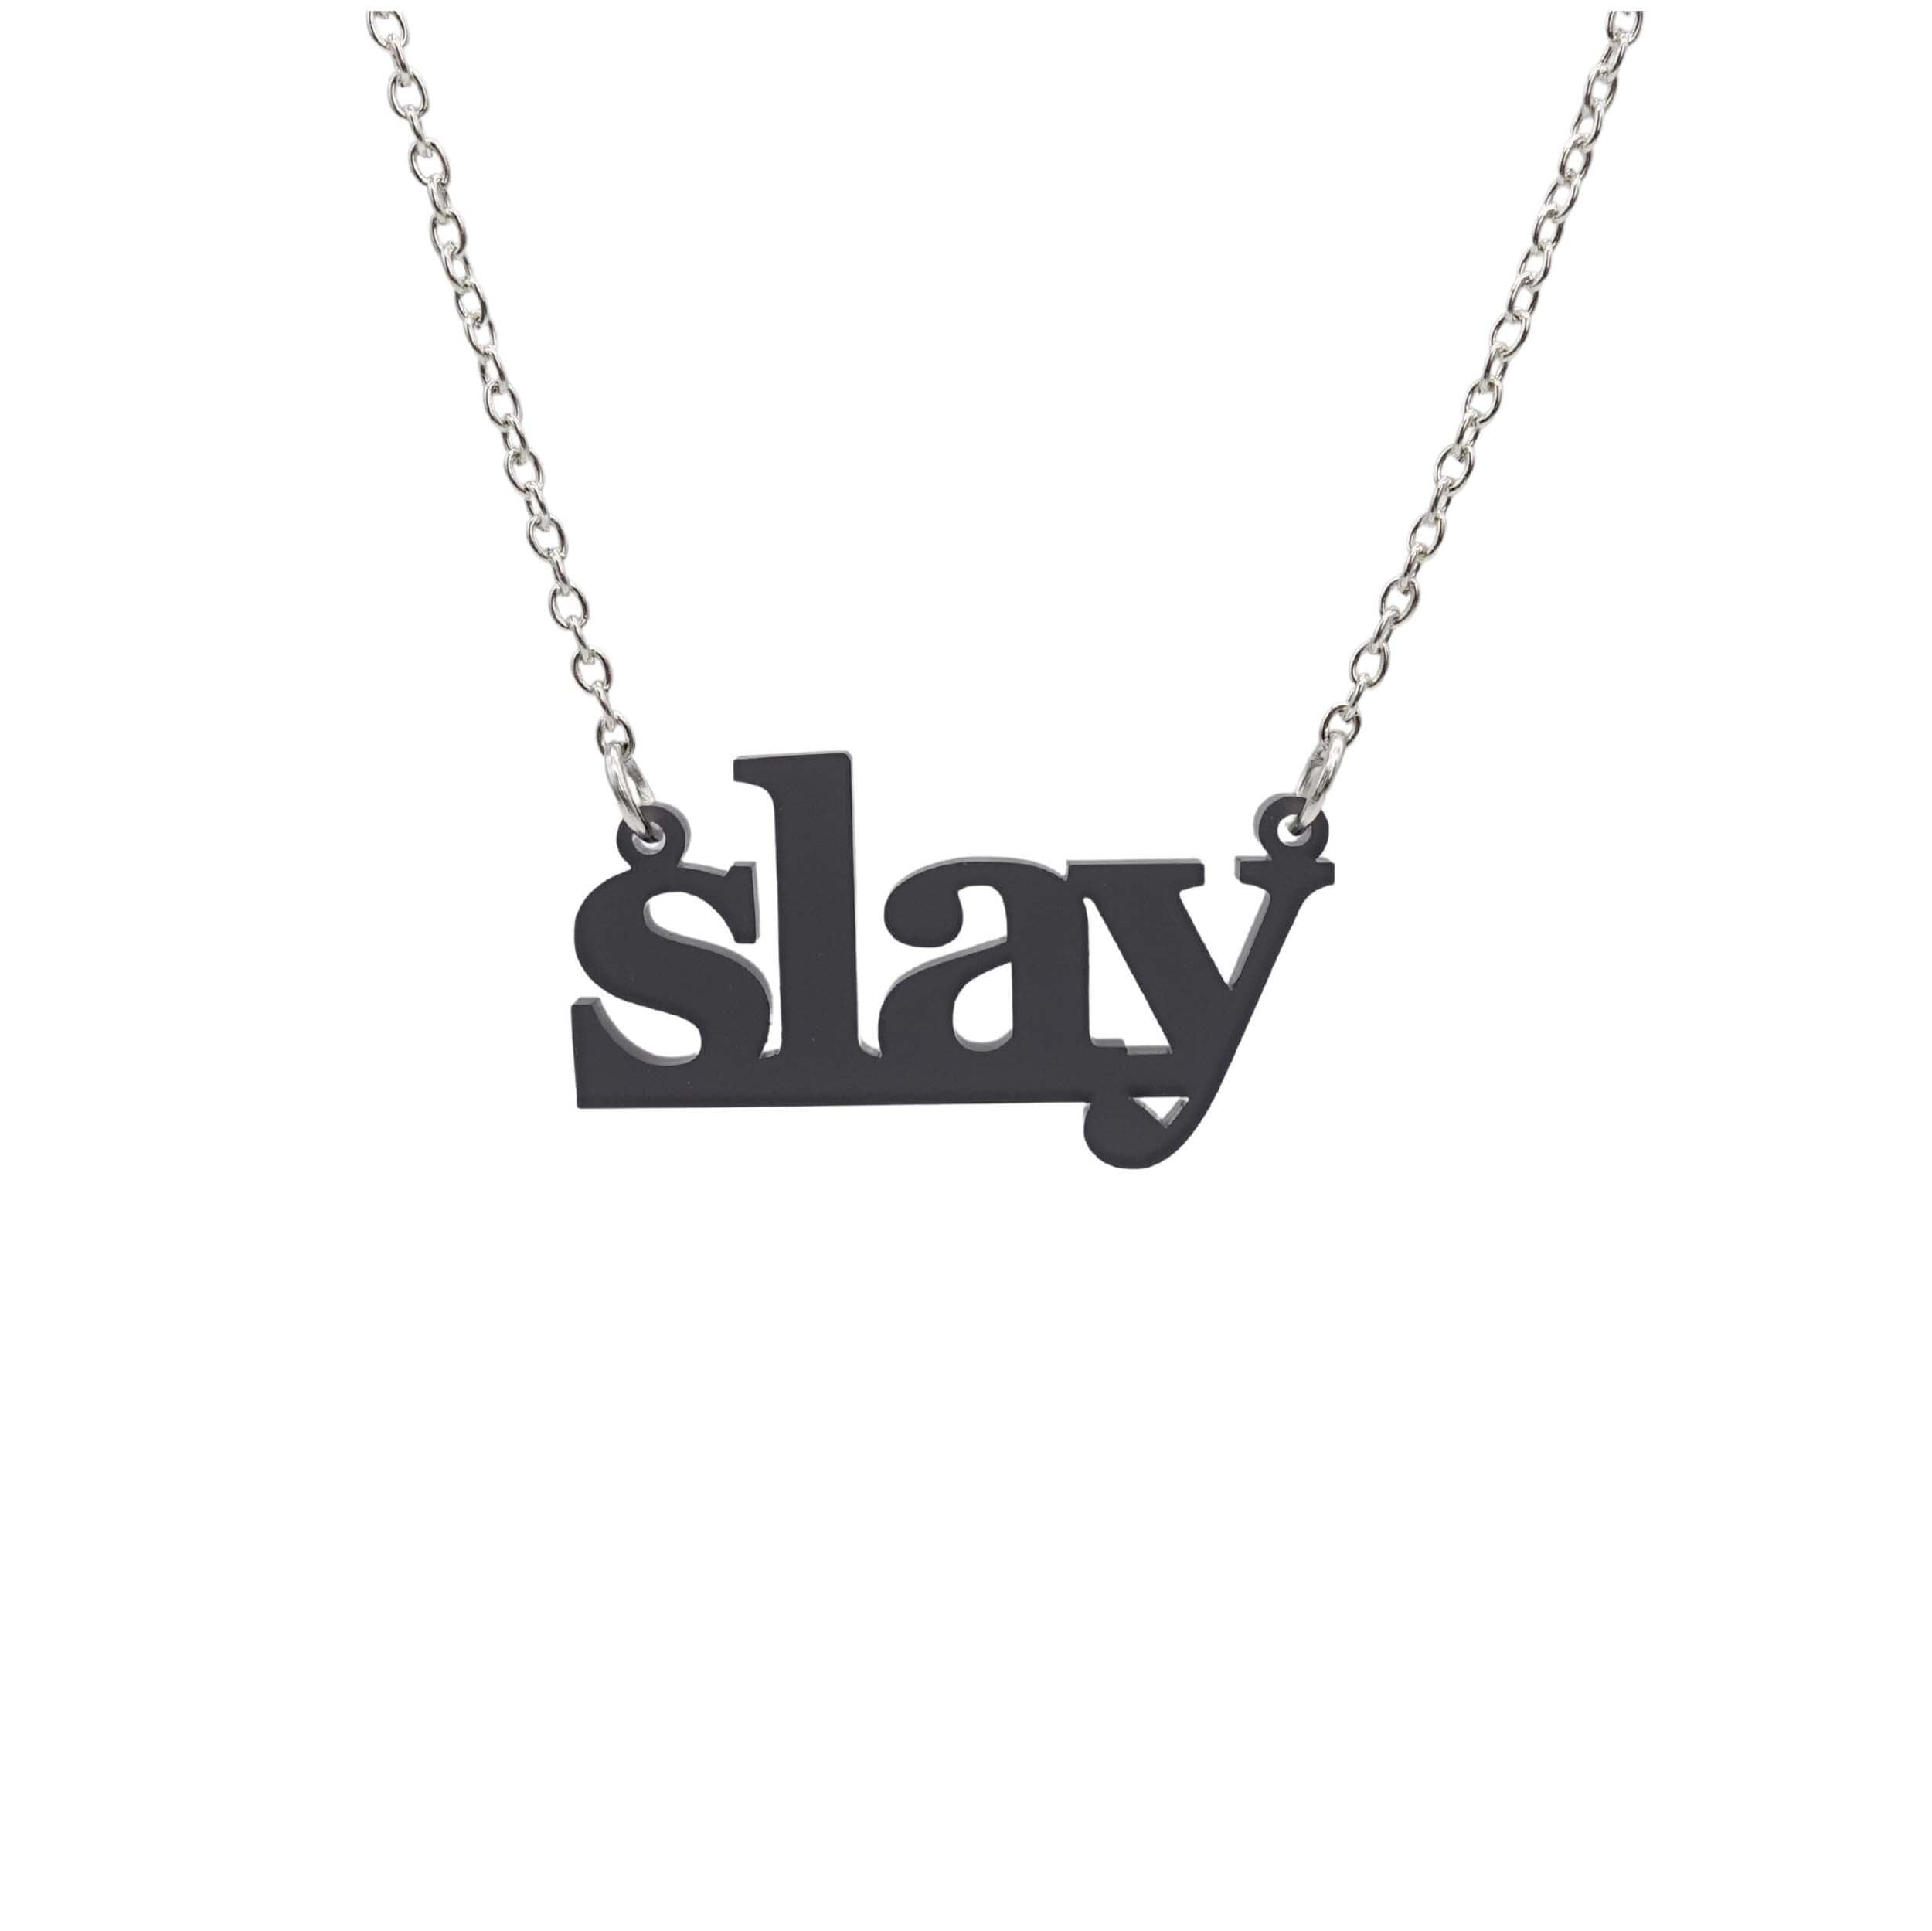 Slay necklace in slate frost on a silver chain shown hanging against a white background. Designed by Sarah Day for Wear and Resist. £2 goes to Women for Refugee Women charity. 